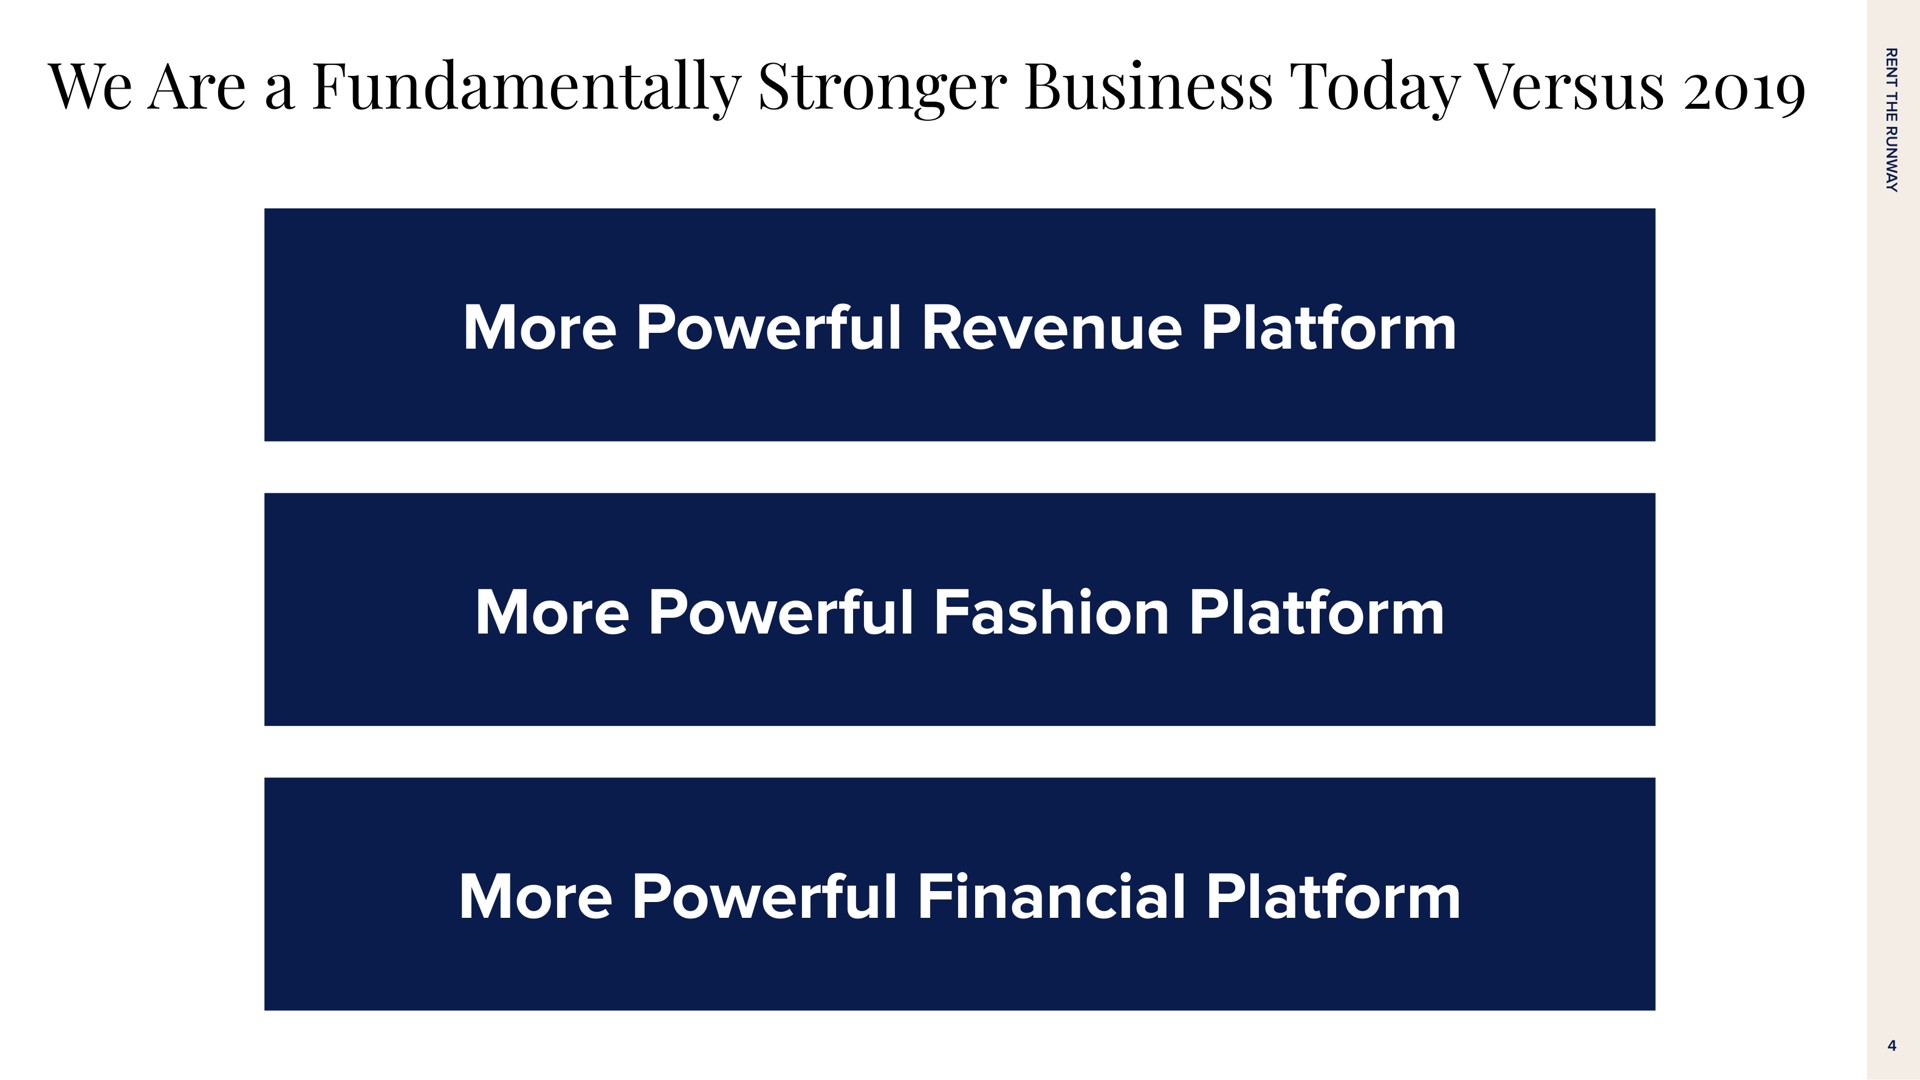 we are a fundamentally business today versus more powerful revenue platform more powerful fashion platform more powerful financial platform | Rent The Runway